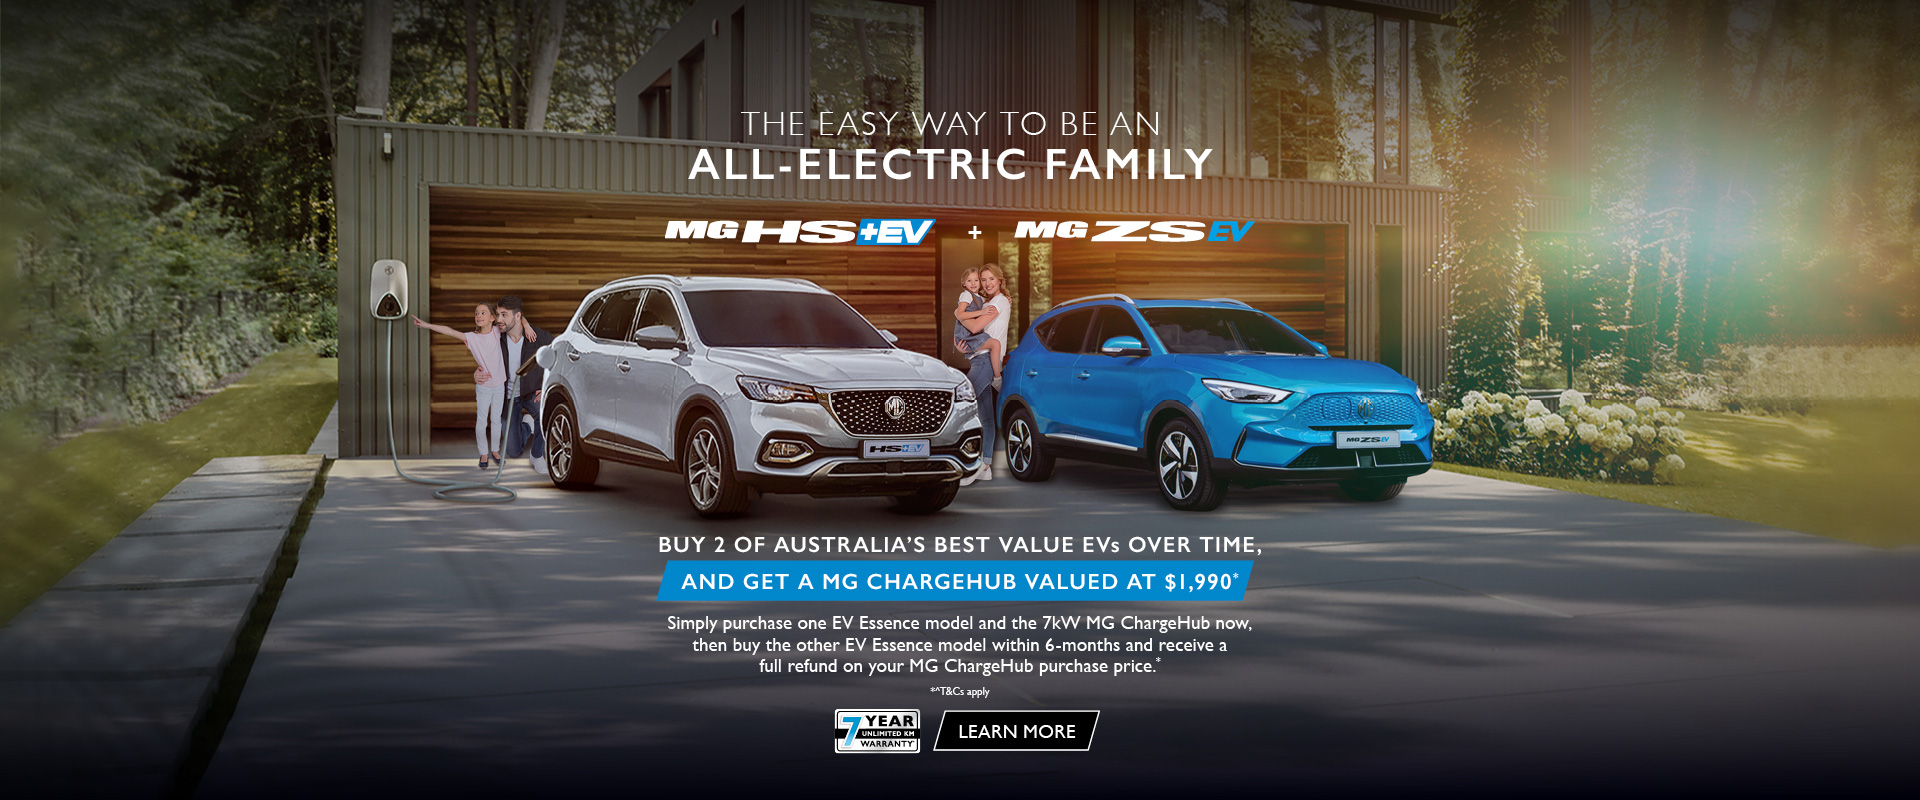 Become an all electric family with MG